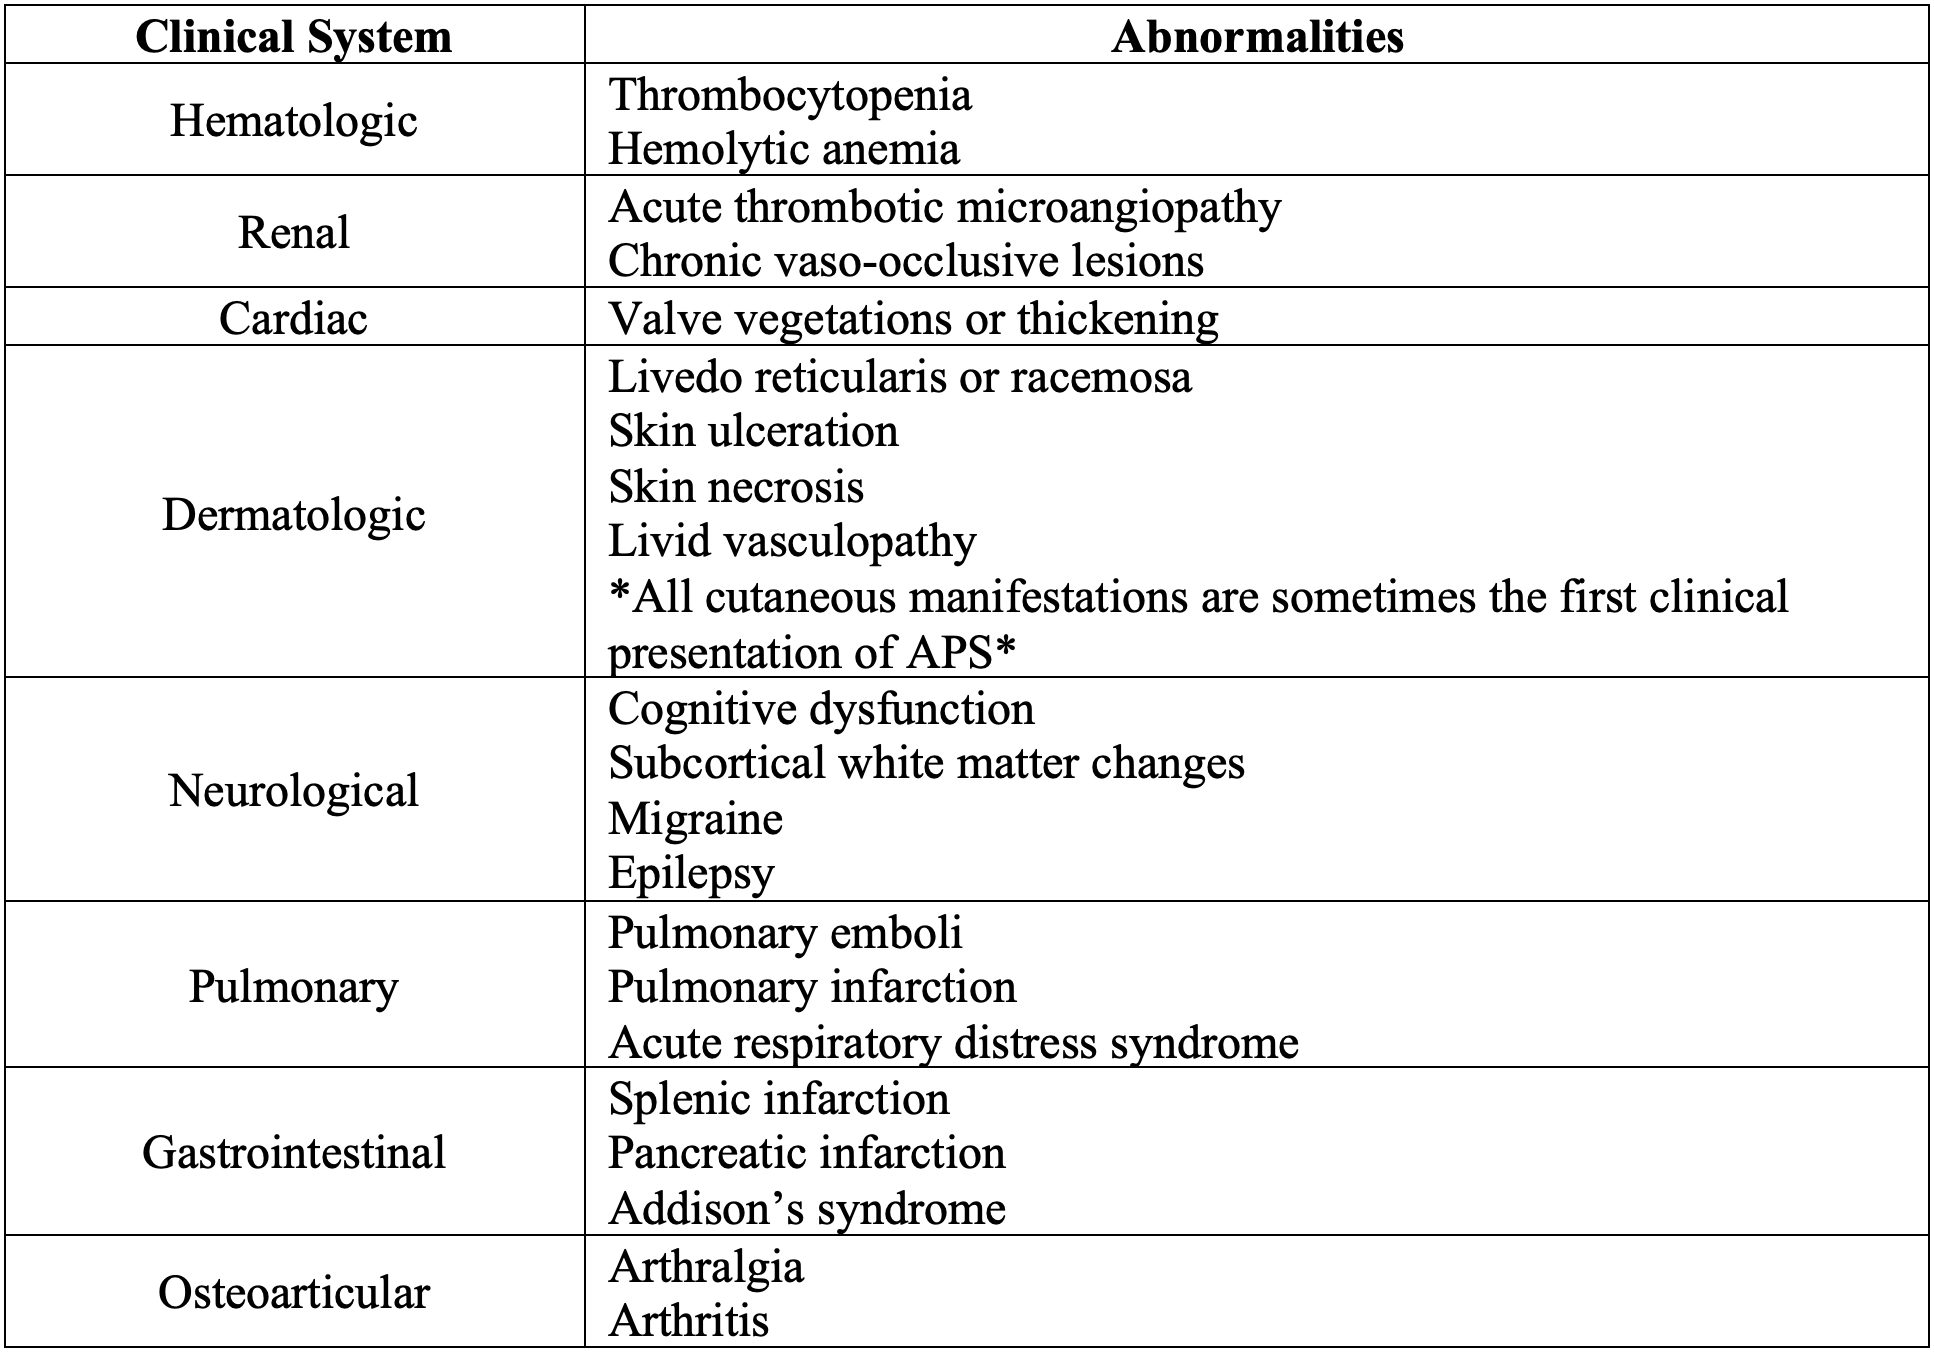 Common clinical signs of APS